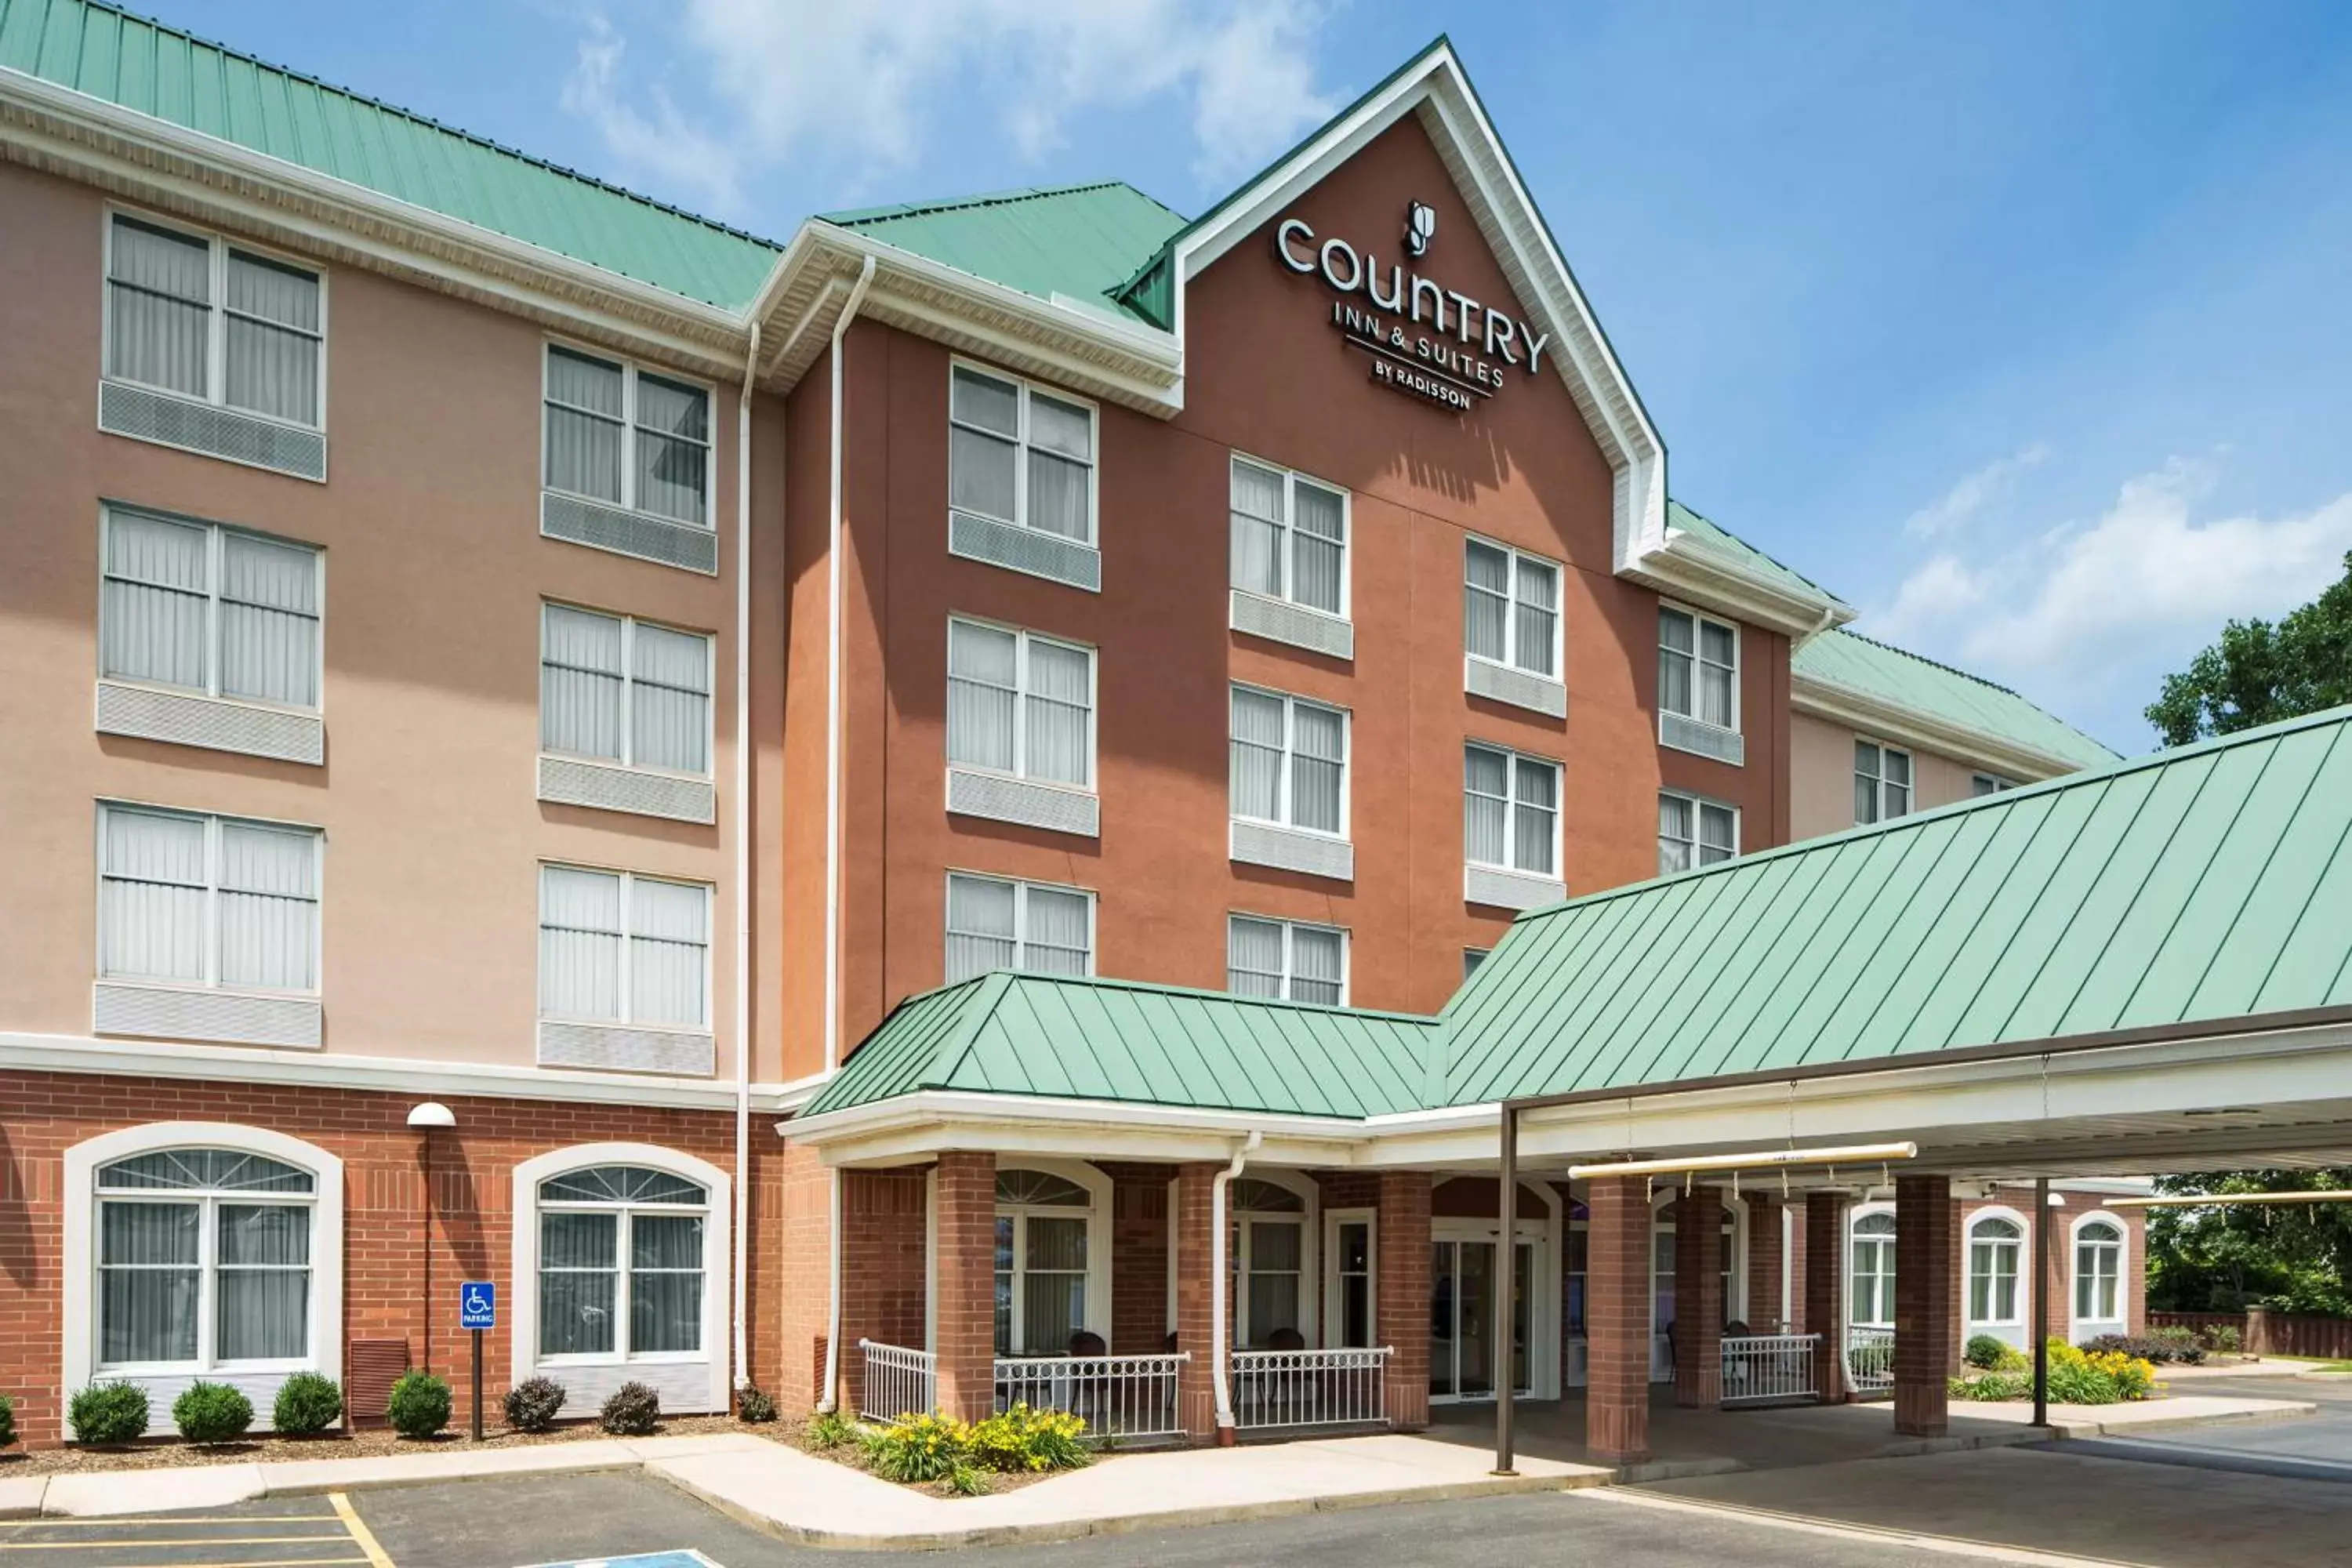 Property Building in Country Inn & Suites by Radisson, Cuyahoga Falls, OH